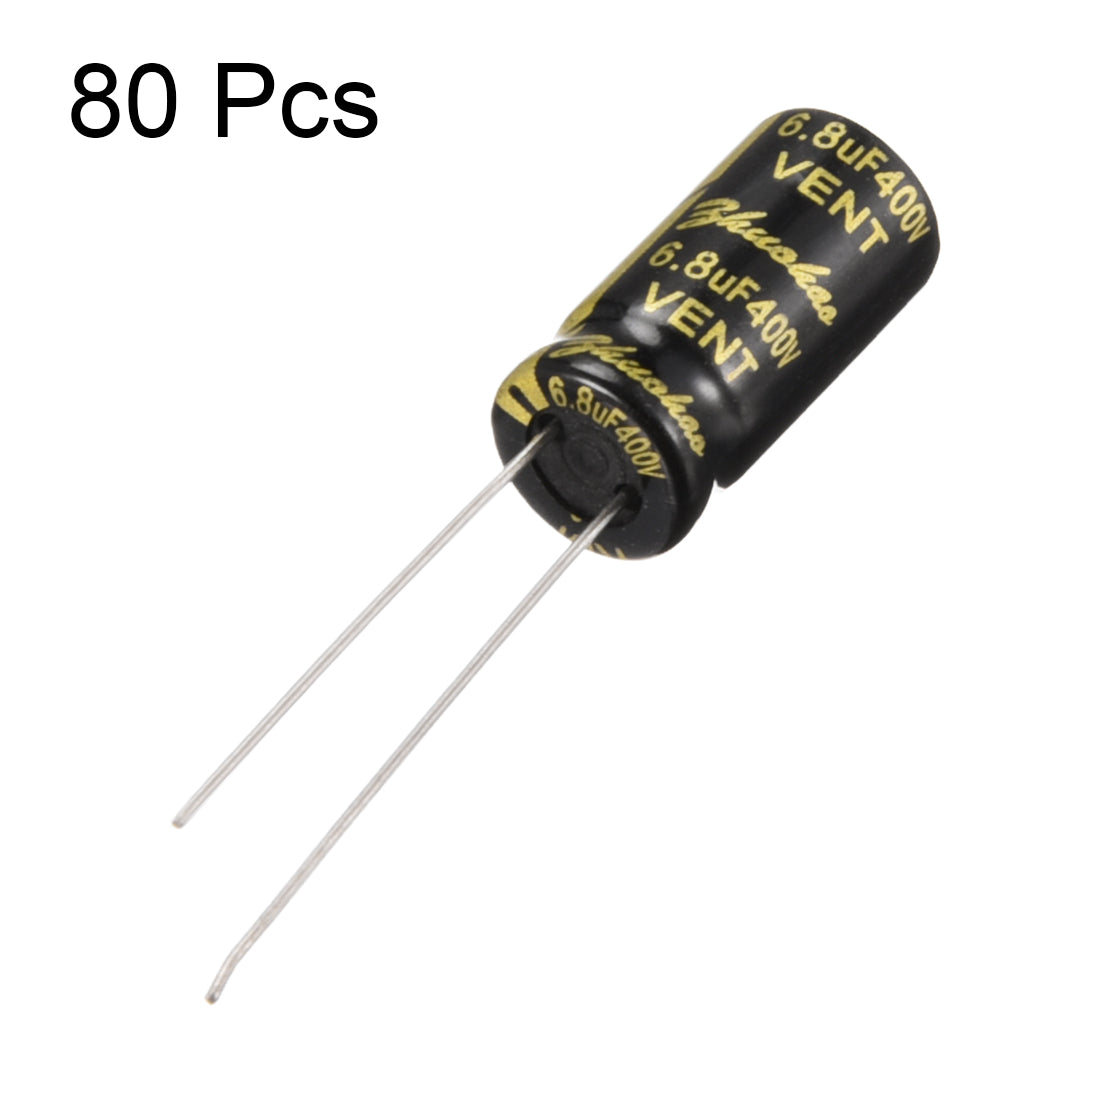 uxcell Uxcell Aluminum Radial Electrolytic Capacitor with 6.8uF 400V 105 Celsius Life 2000H 8 x 16 mm Black 80pcs